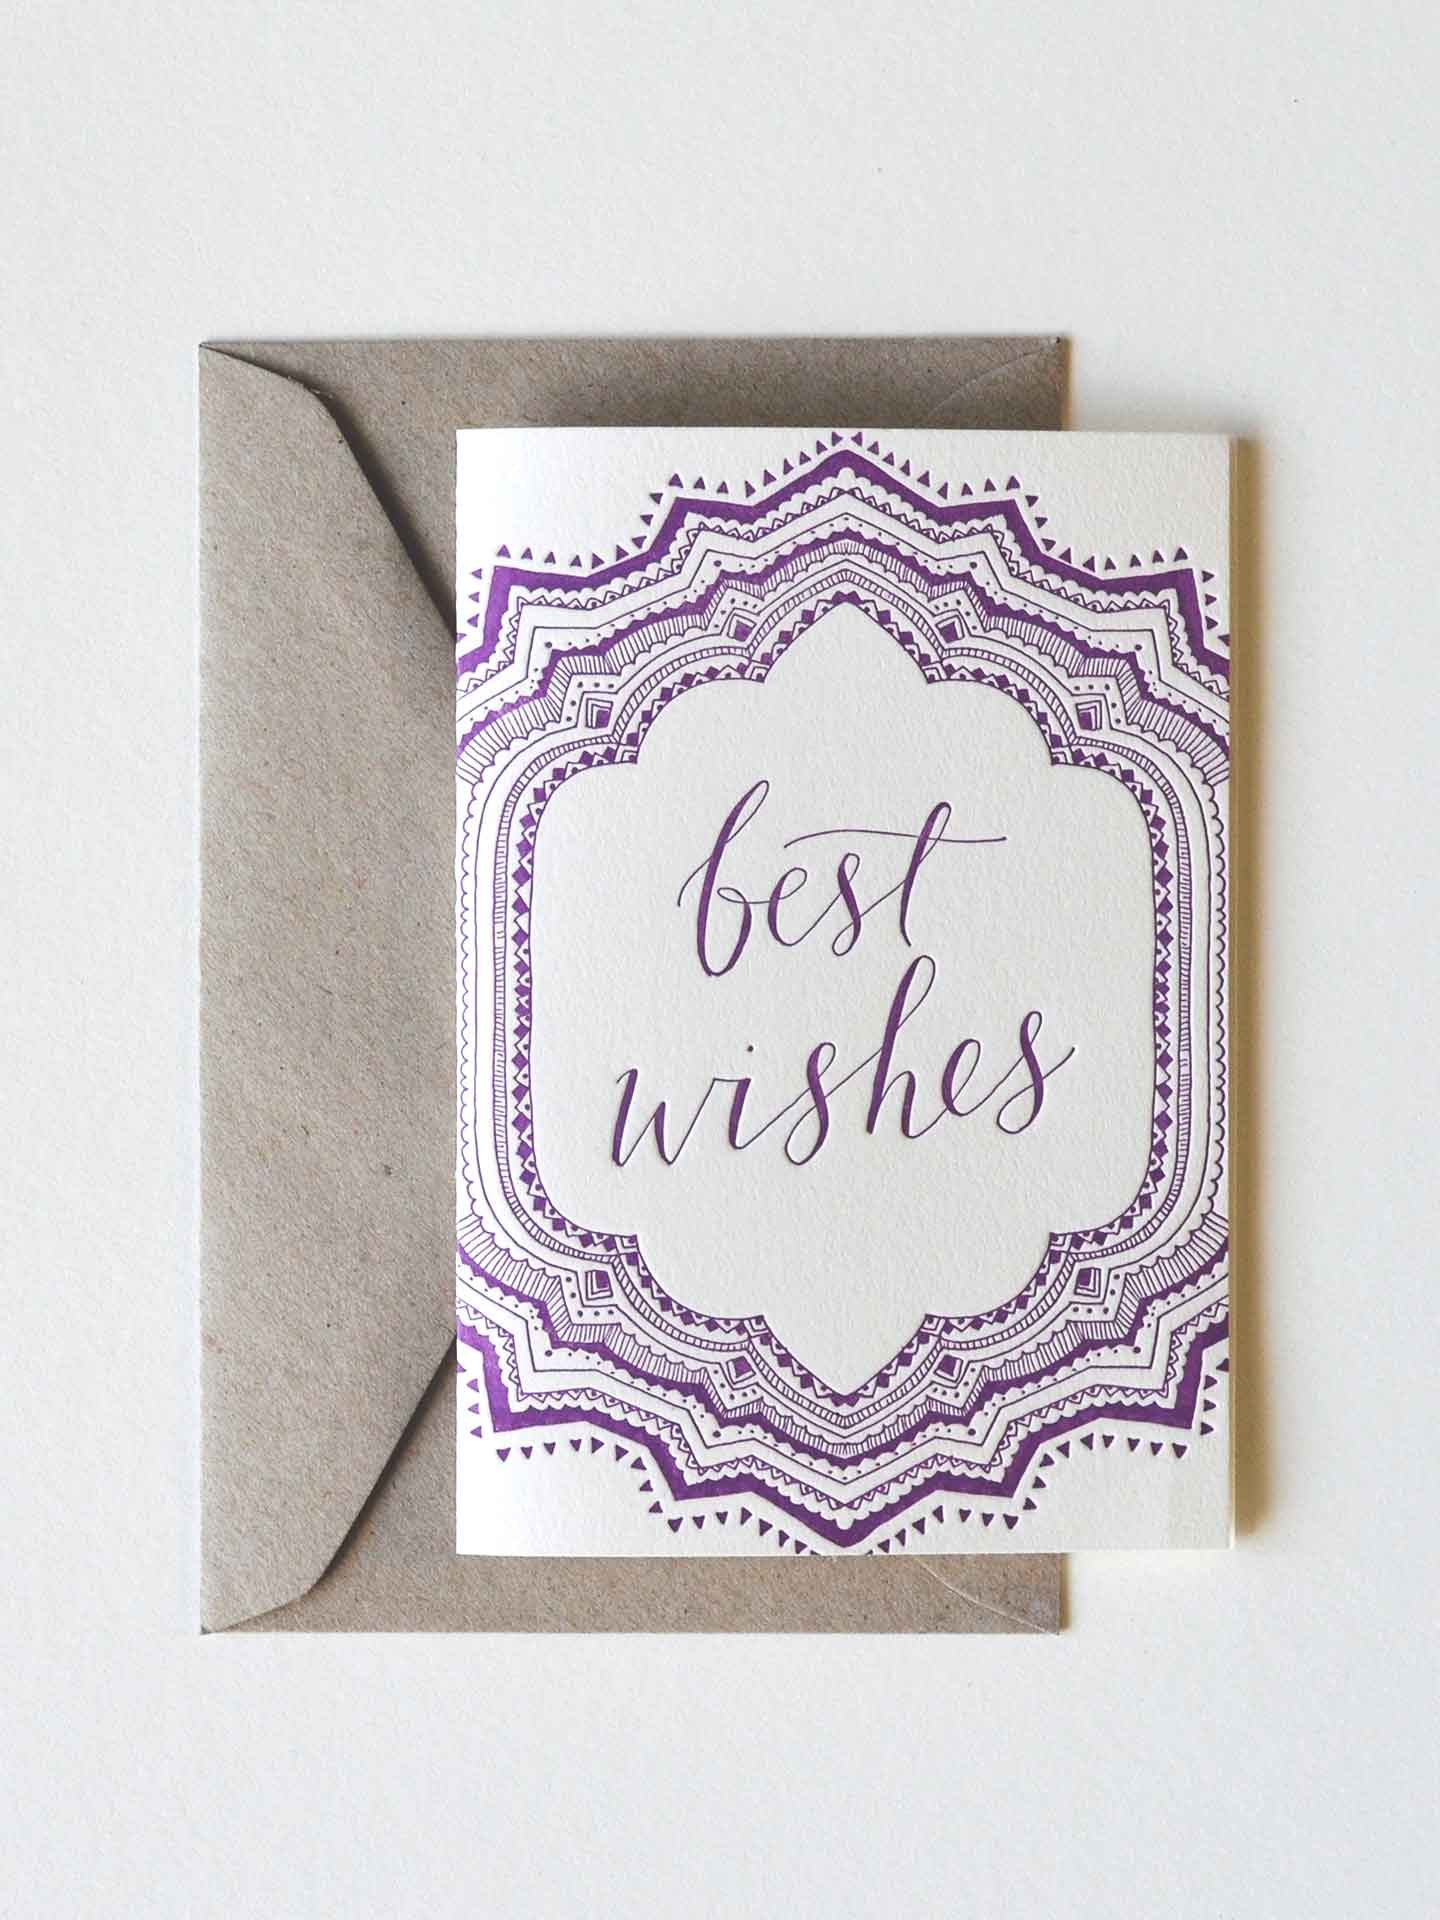 BEST WISHES gift card